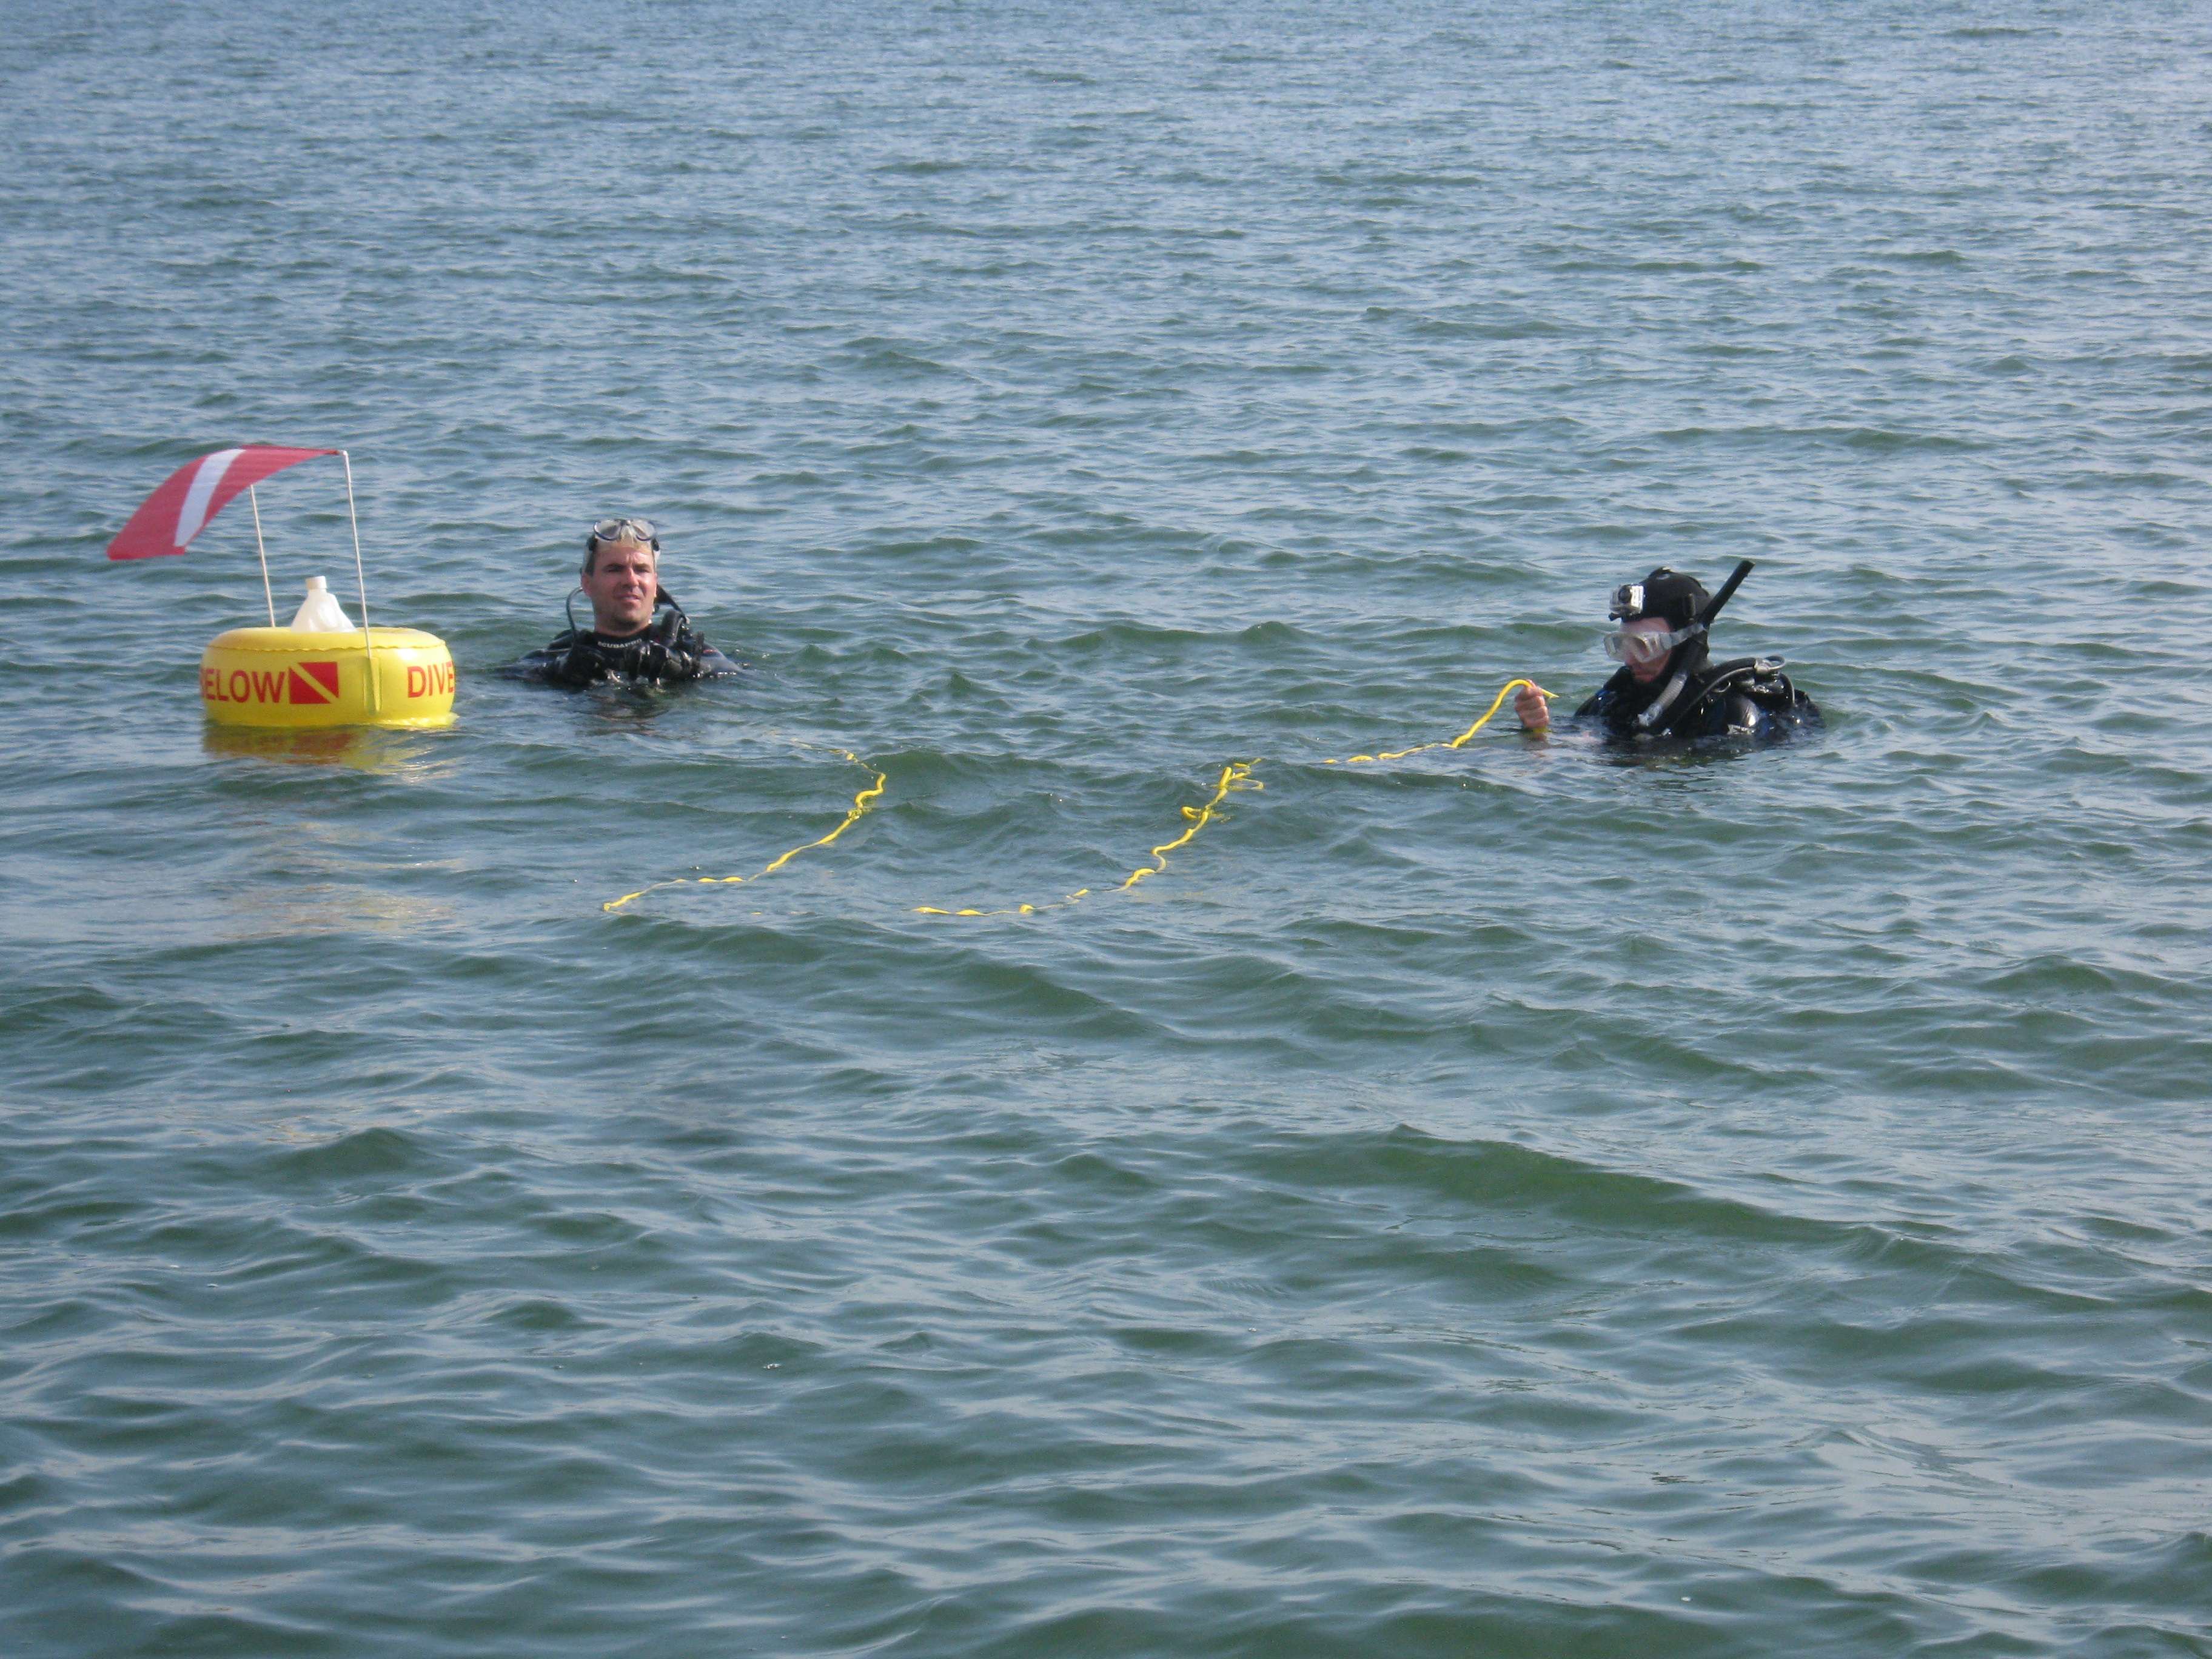 Two scuba divers mid-lake next to a caution buoy